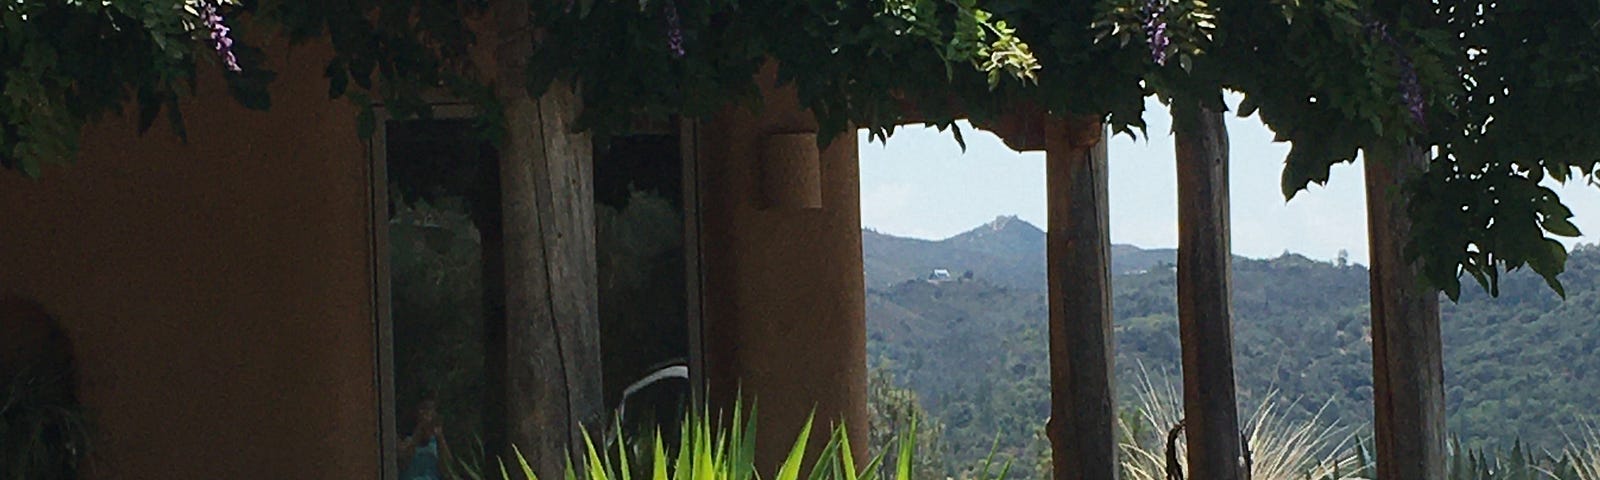 Front right of adobe home, wisteria draped over front, plants in foreground, mountains in back.